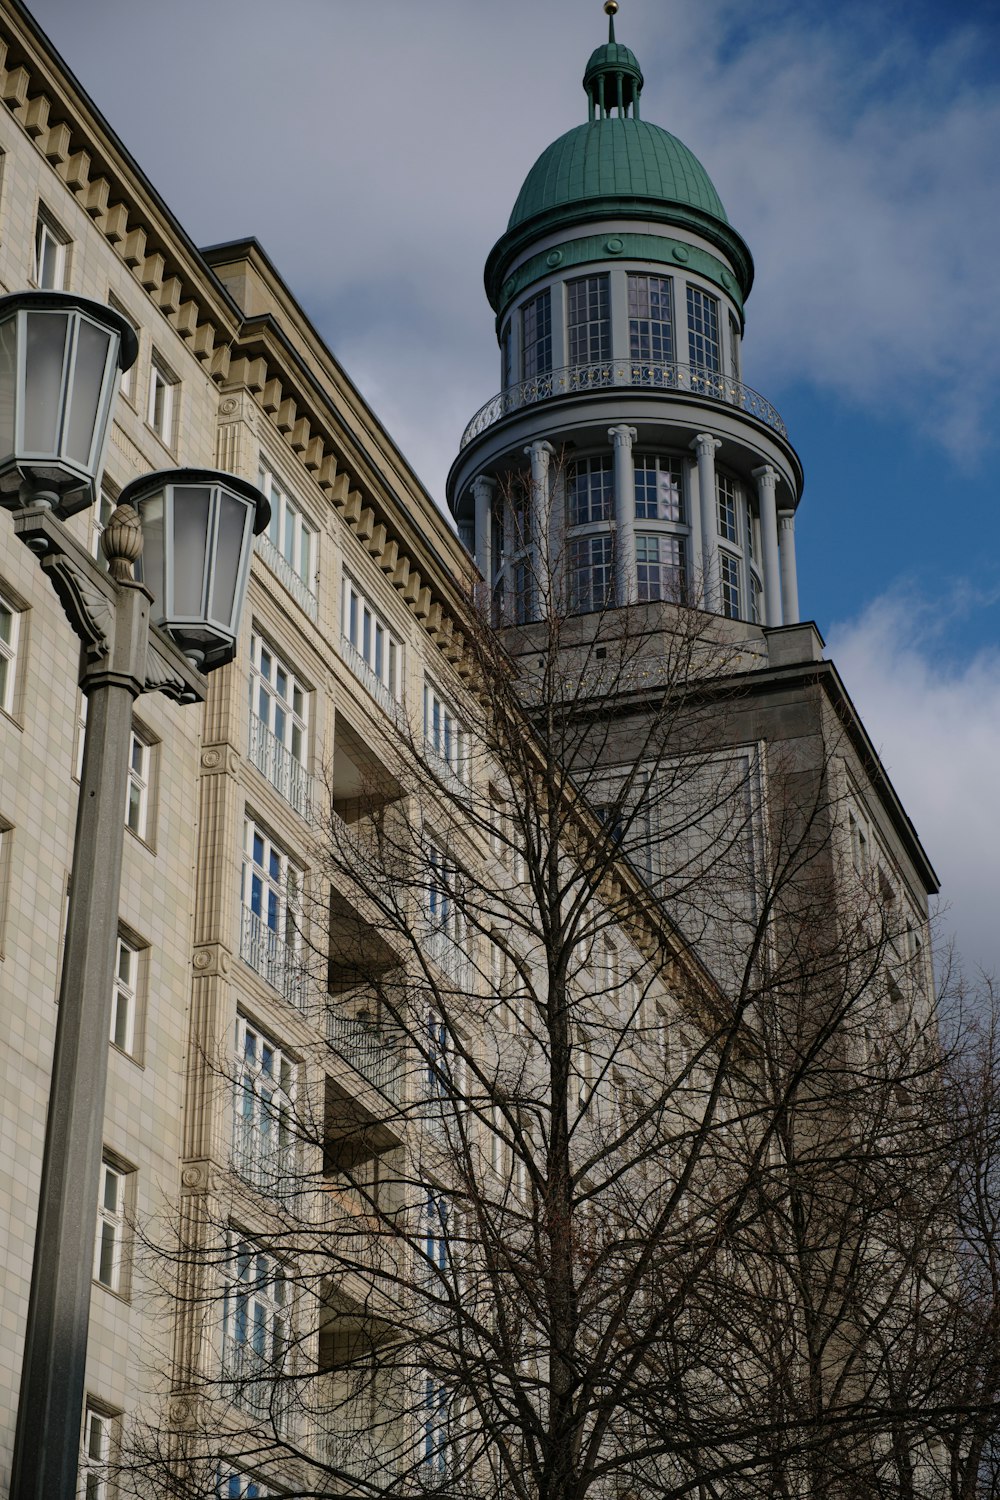 a tall building with a green dome on top